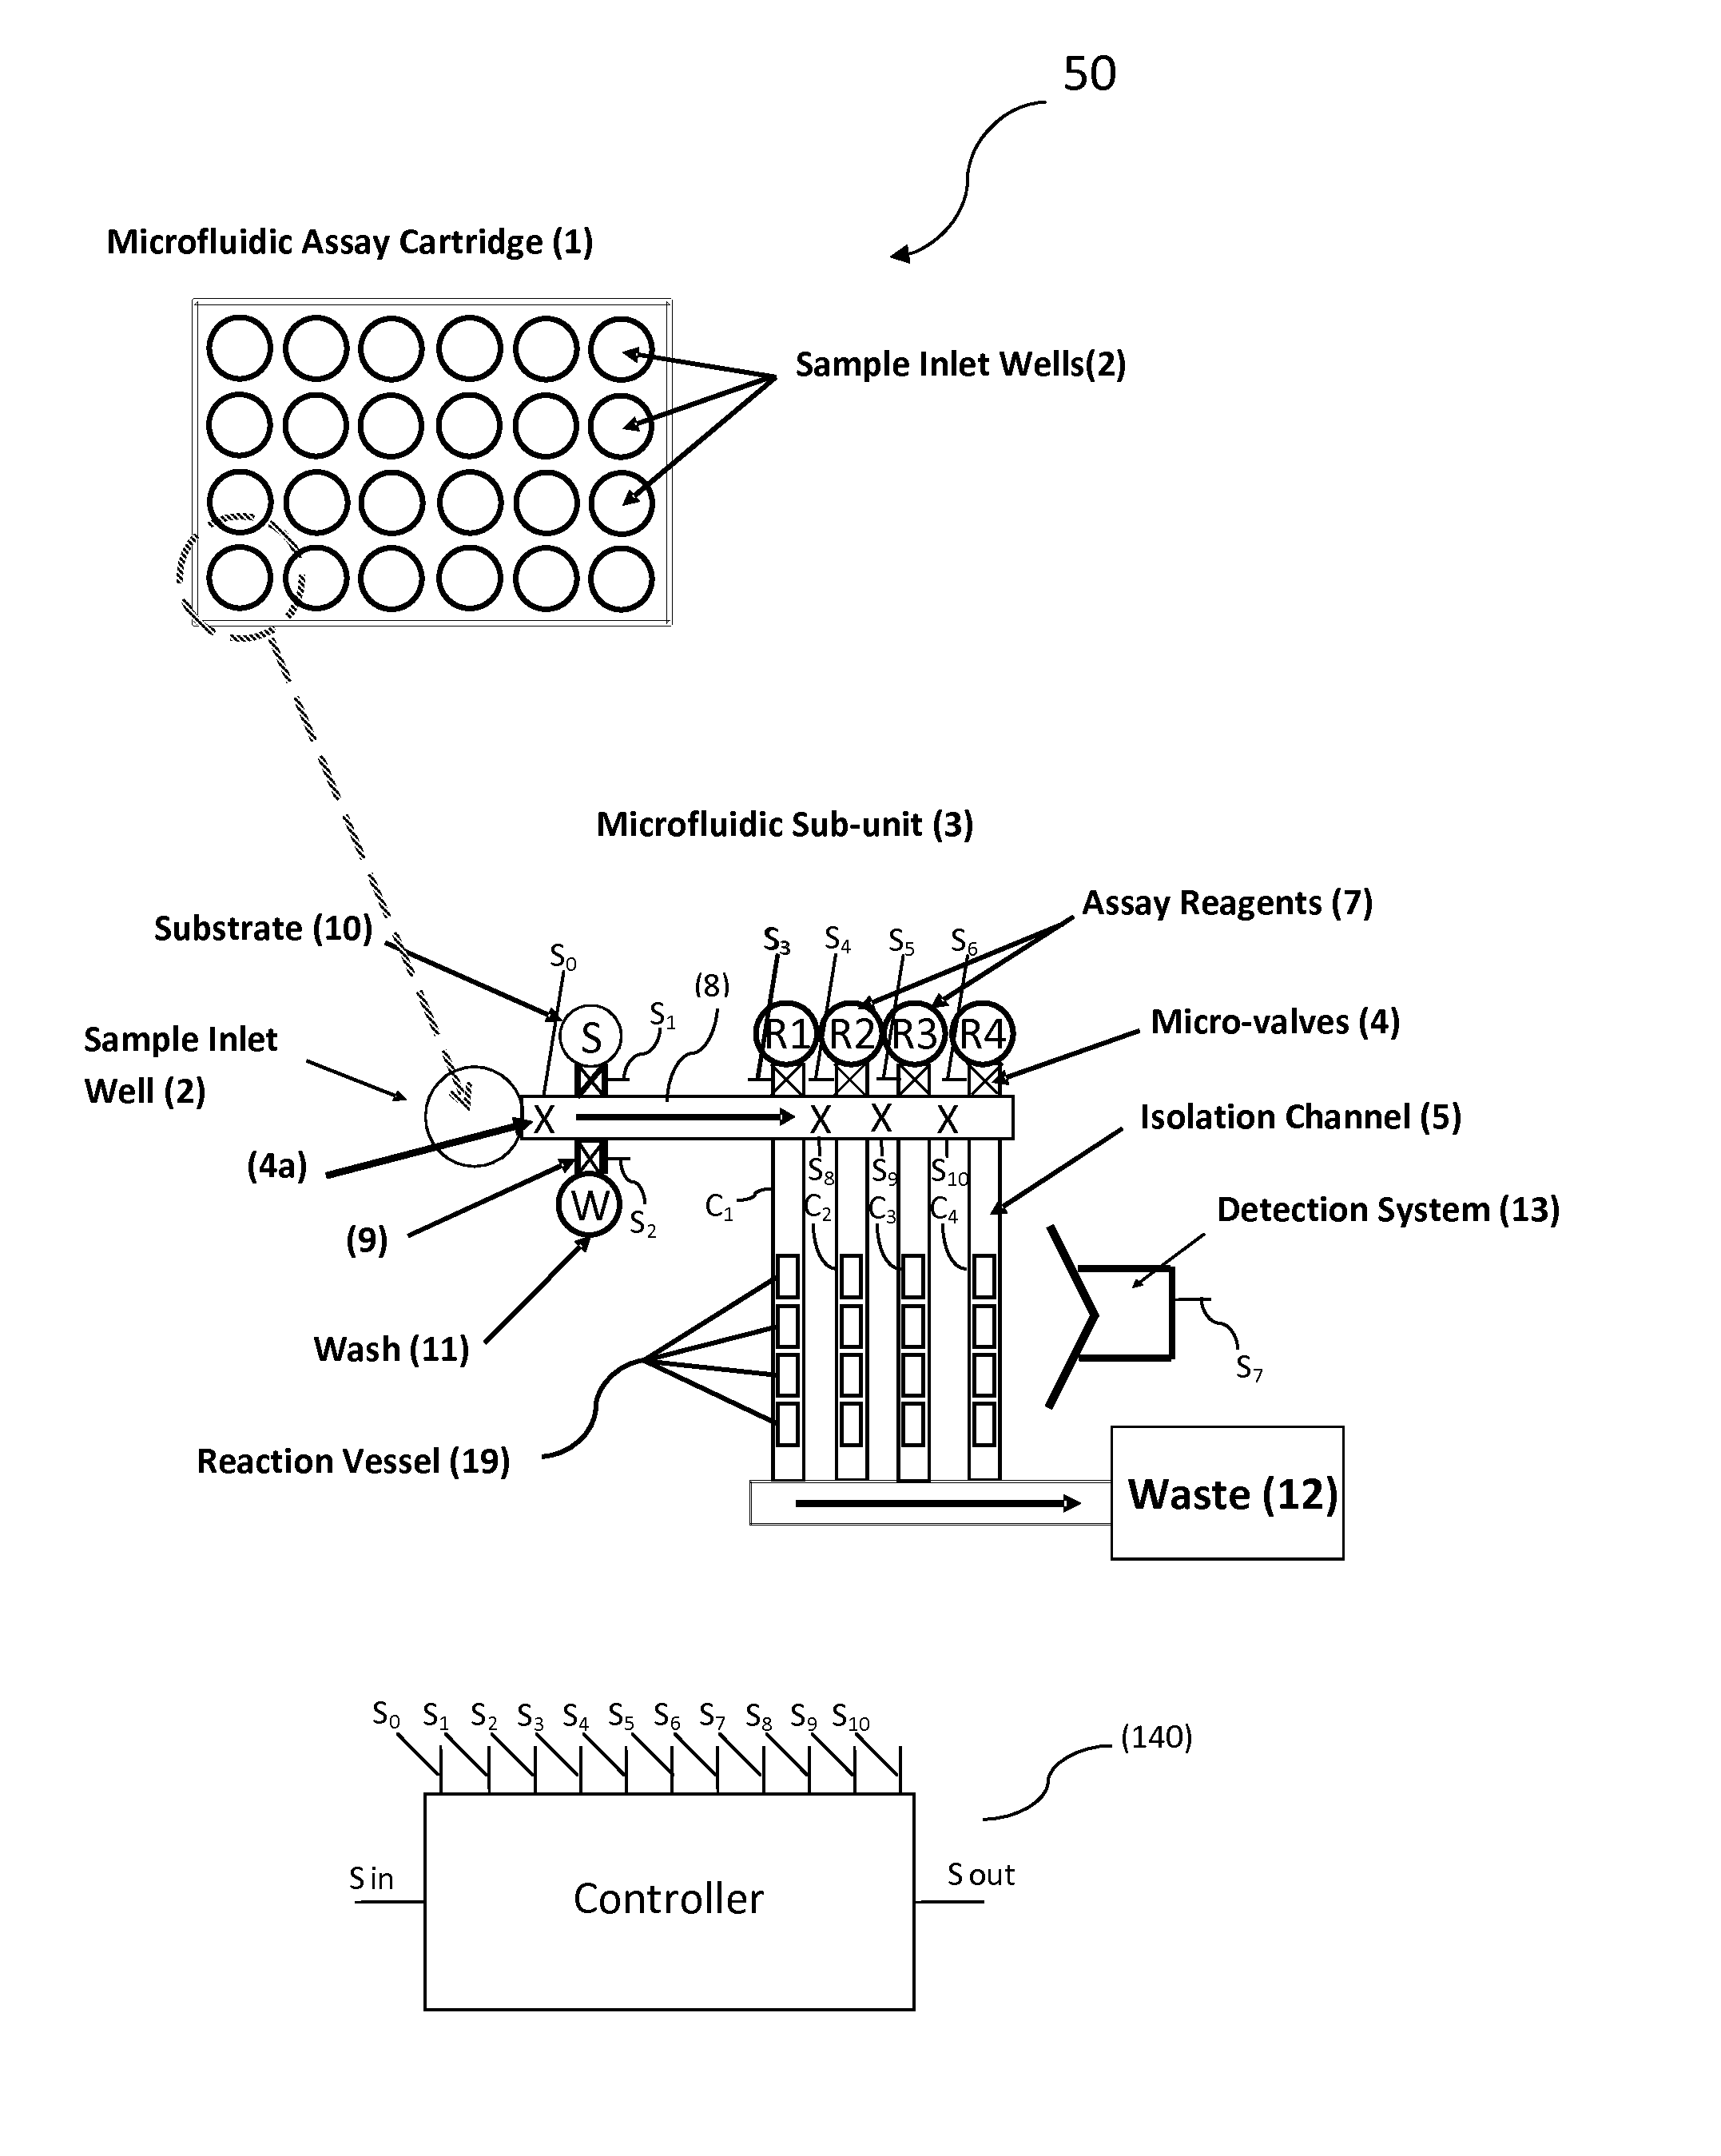 Method and Apparatus for Performing Assays